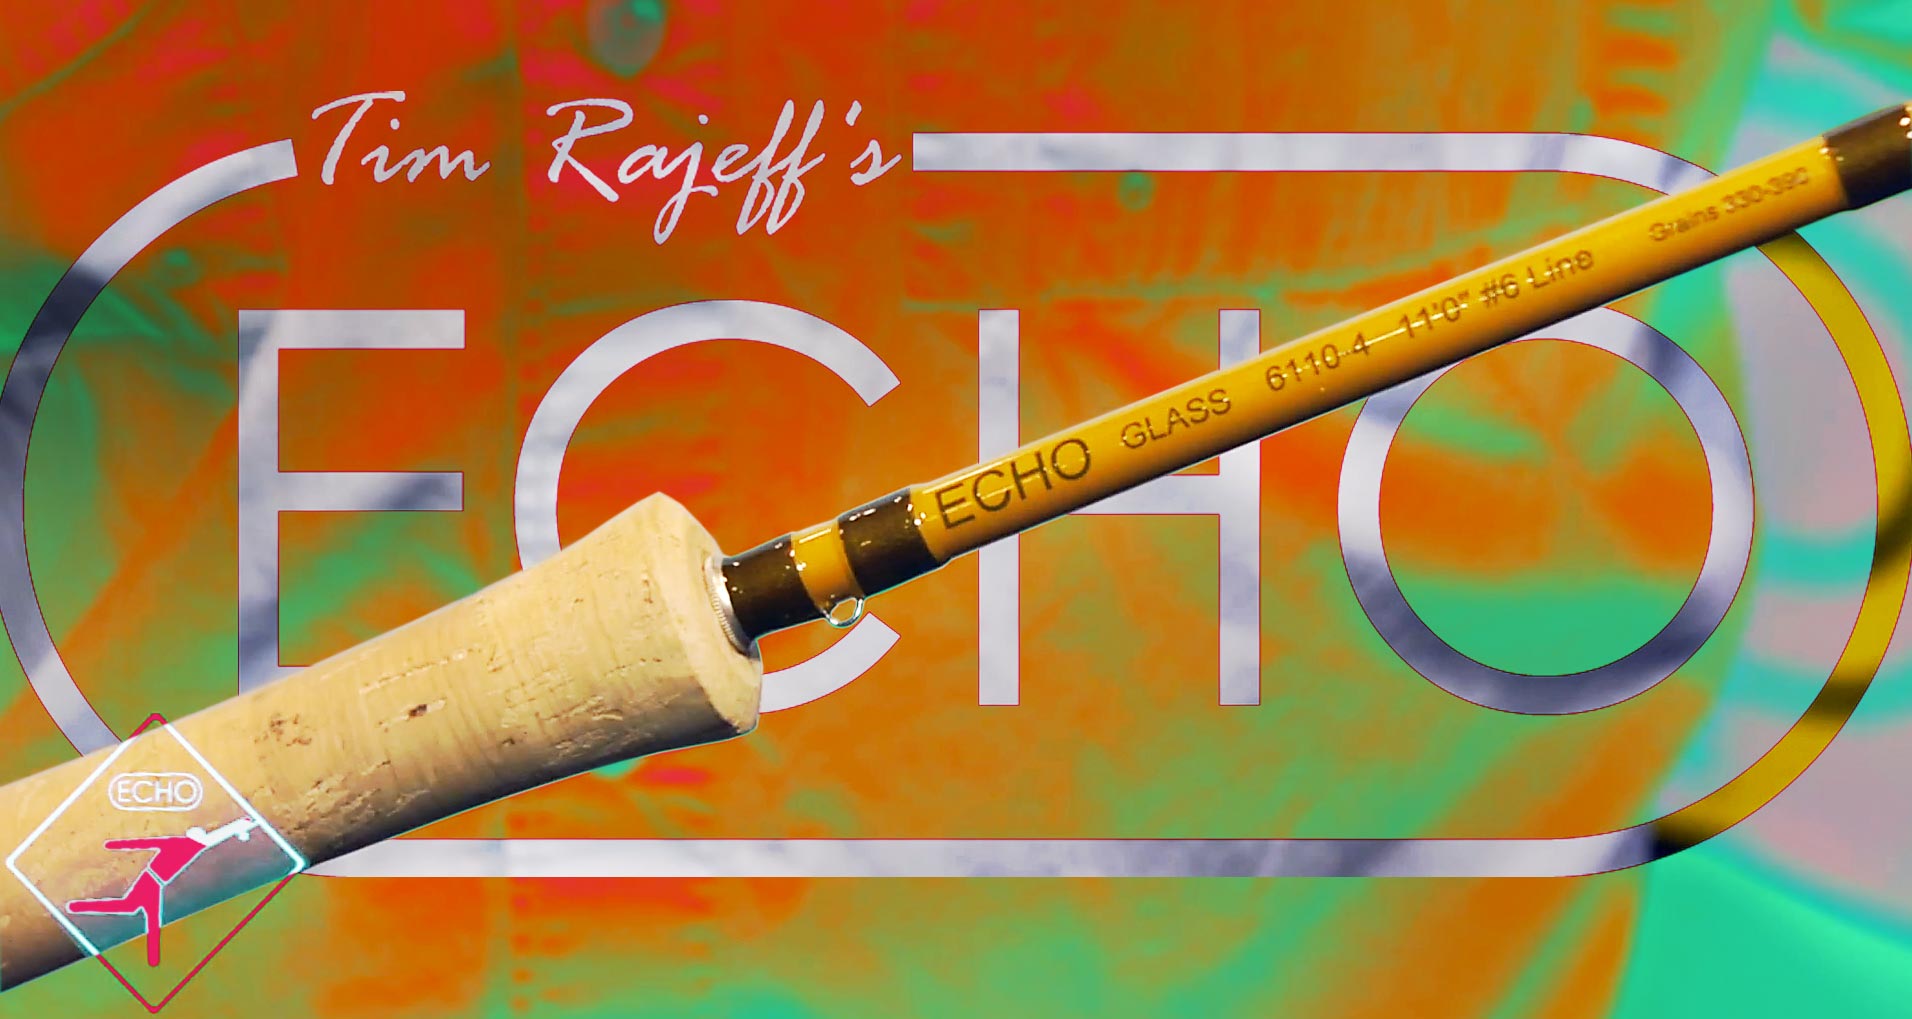 Awesome new fly rods from Echo - Fly Fishing